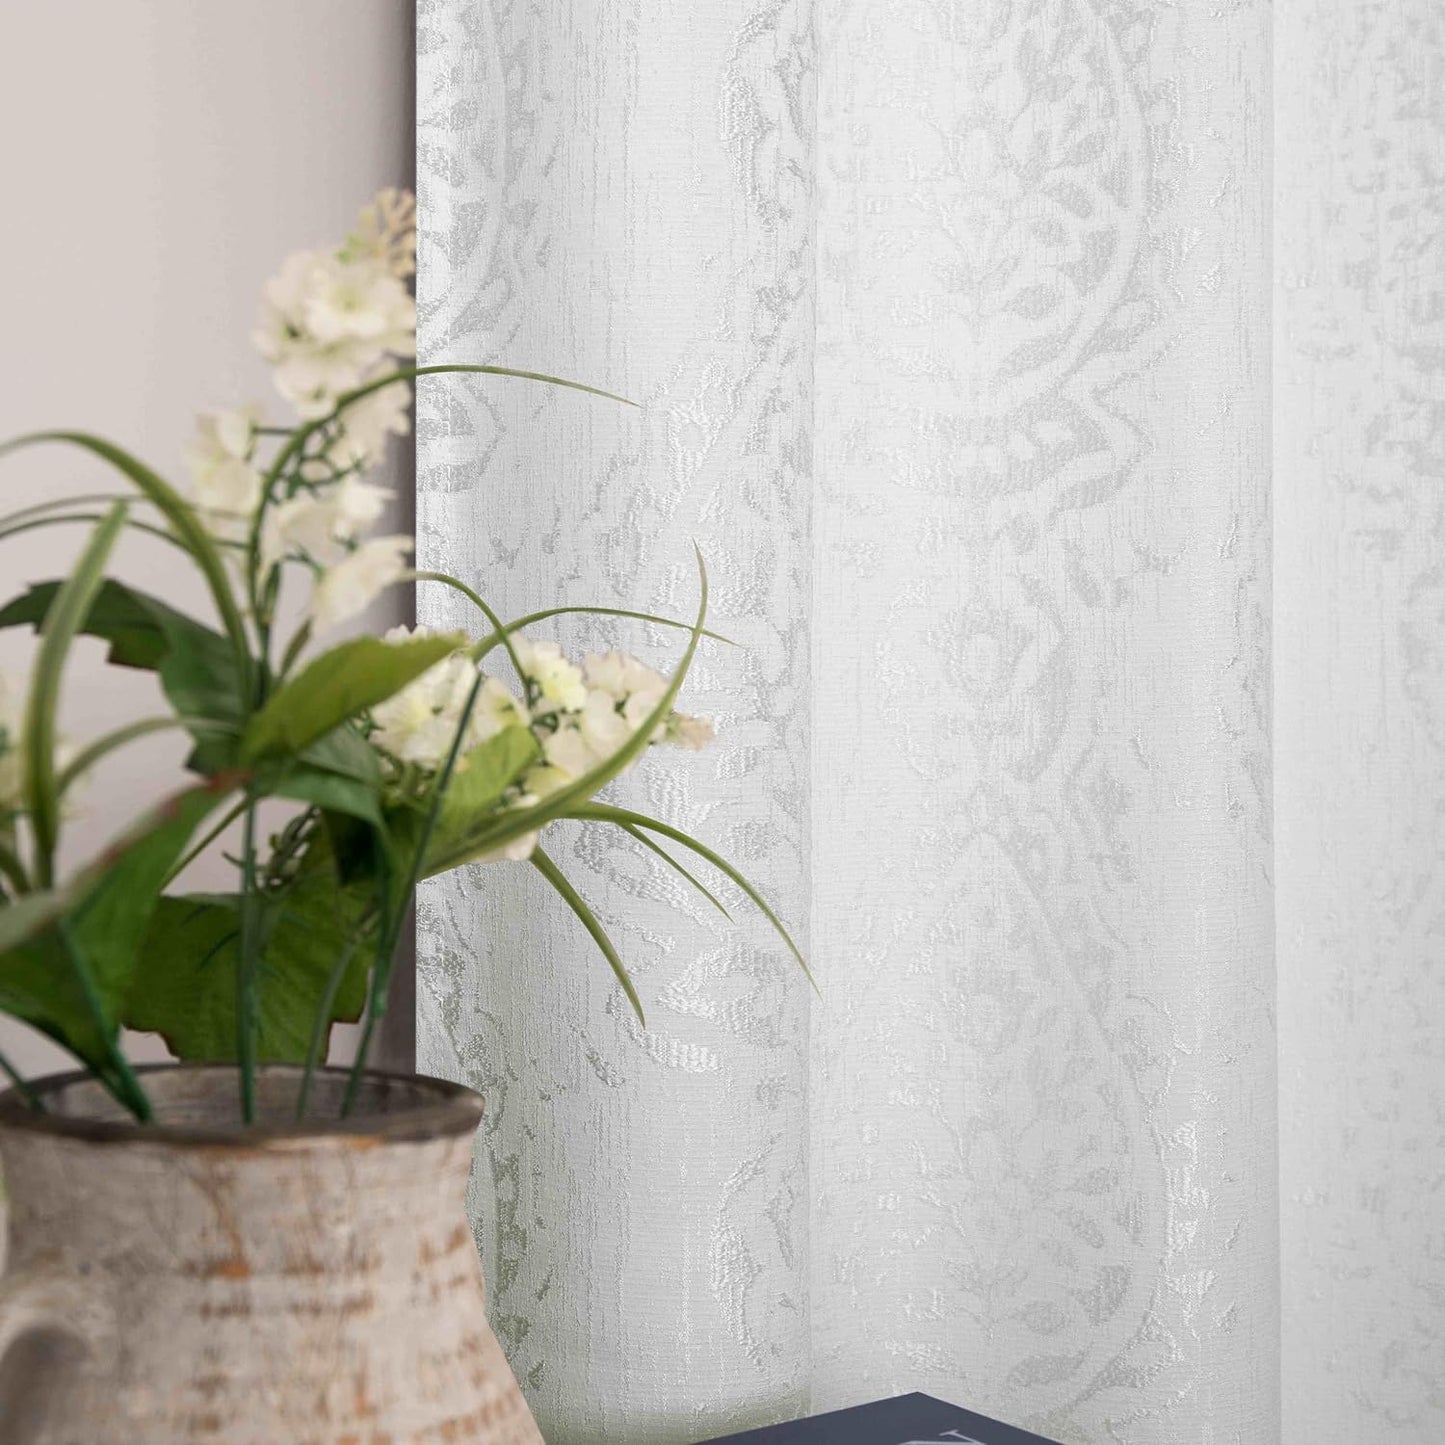 Off White Curtains 84 Inches Long for Bedroom Grommet Tone on Tone Design 3D Jacquard Embossed Damask Moroccan Pattern 50% Blackout Drapes for Living Room 84 Inch Length 2 Panels Set Cream  MRS.NATURALL TEXTILE Ivory 52X84 